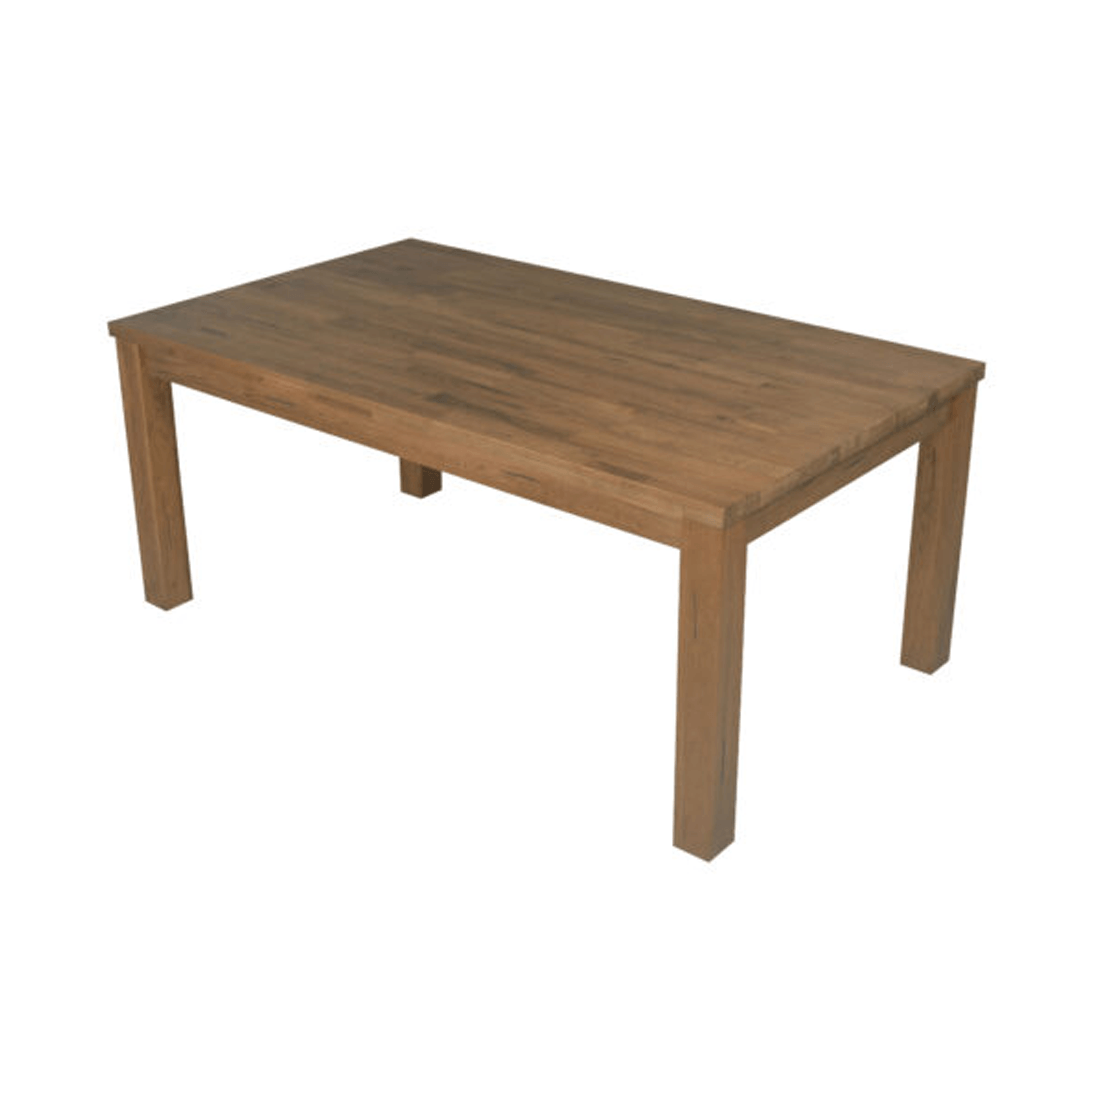 Tripi 1.8M Timber Dining Table